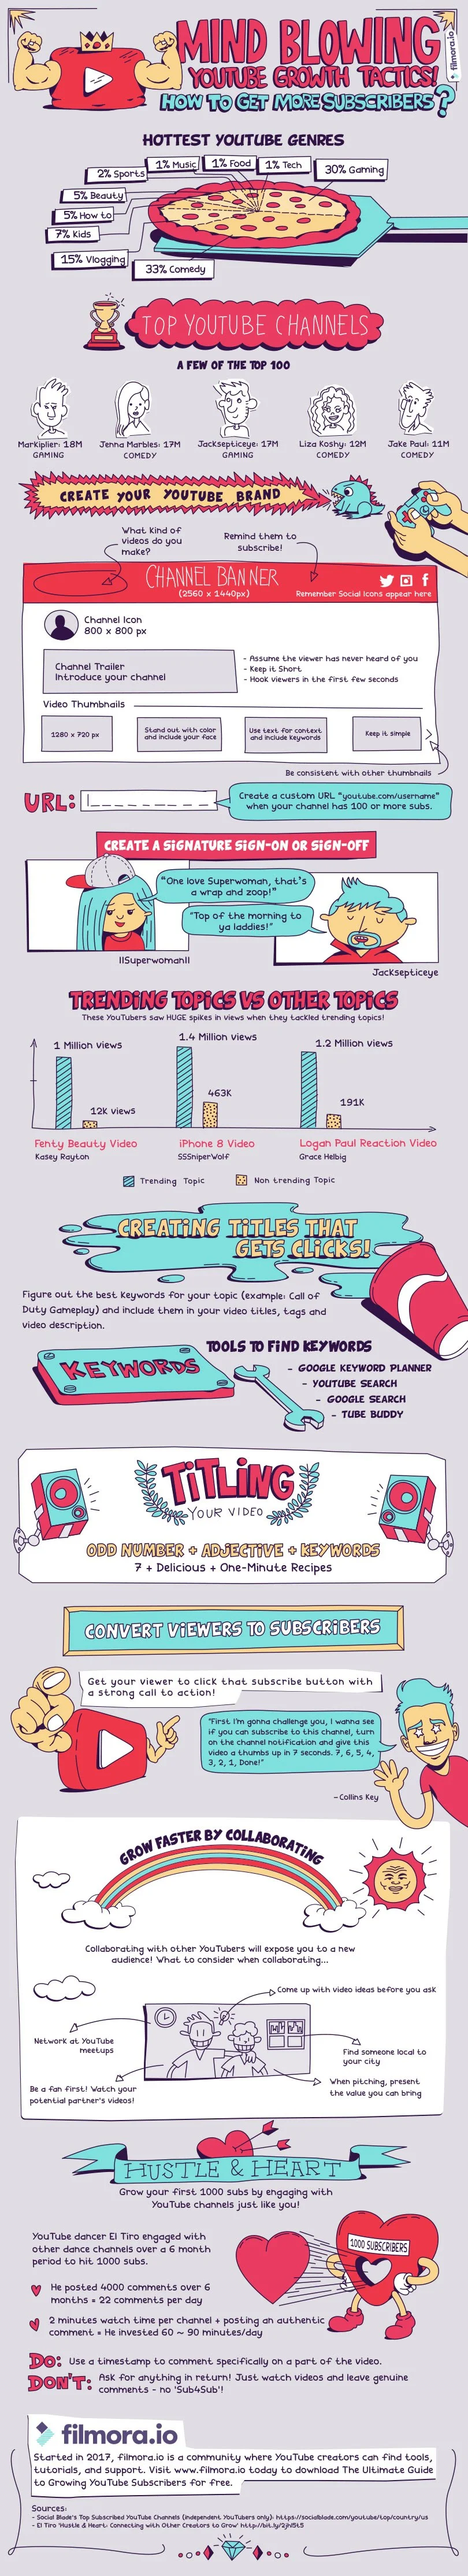 The Hunt for YouTube Subscribers – A Breakdown of YouTube Fame - infographic